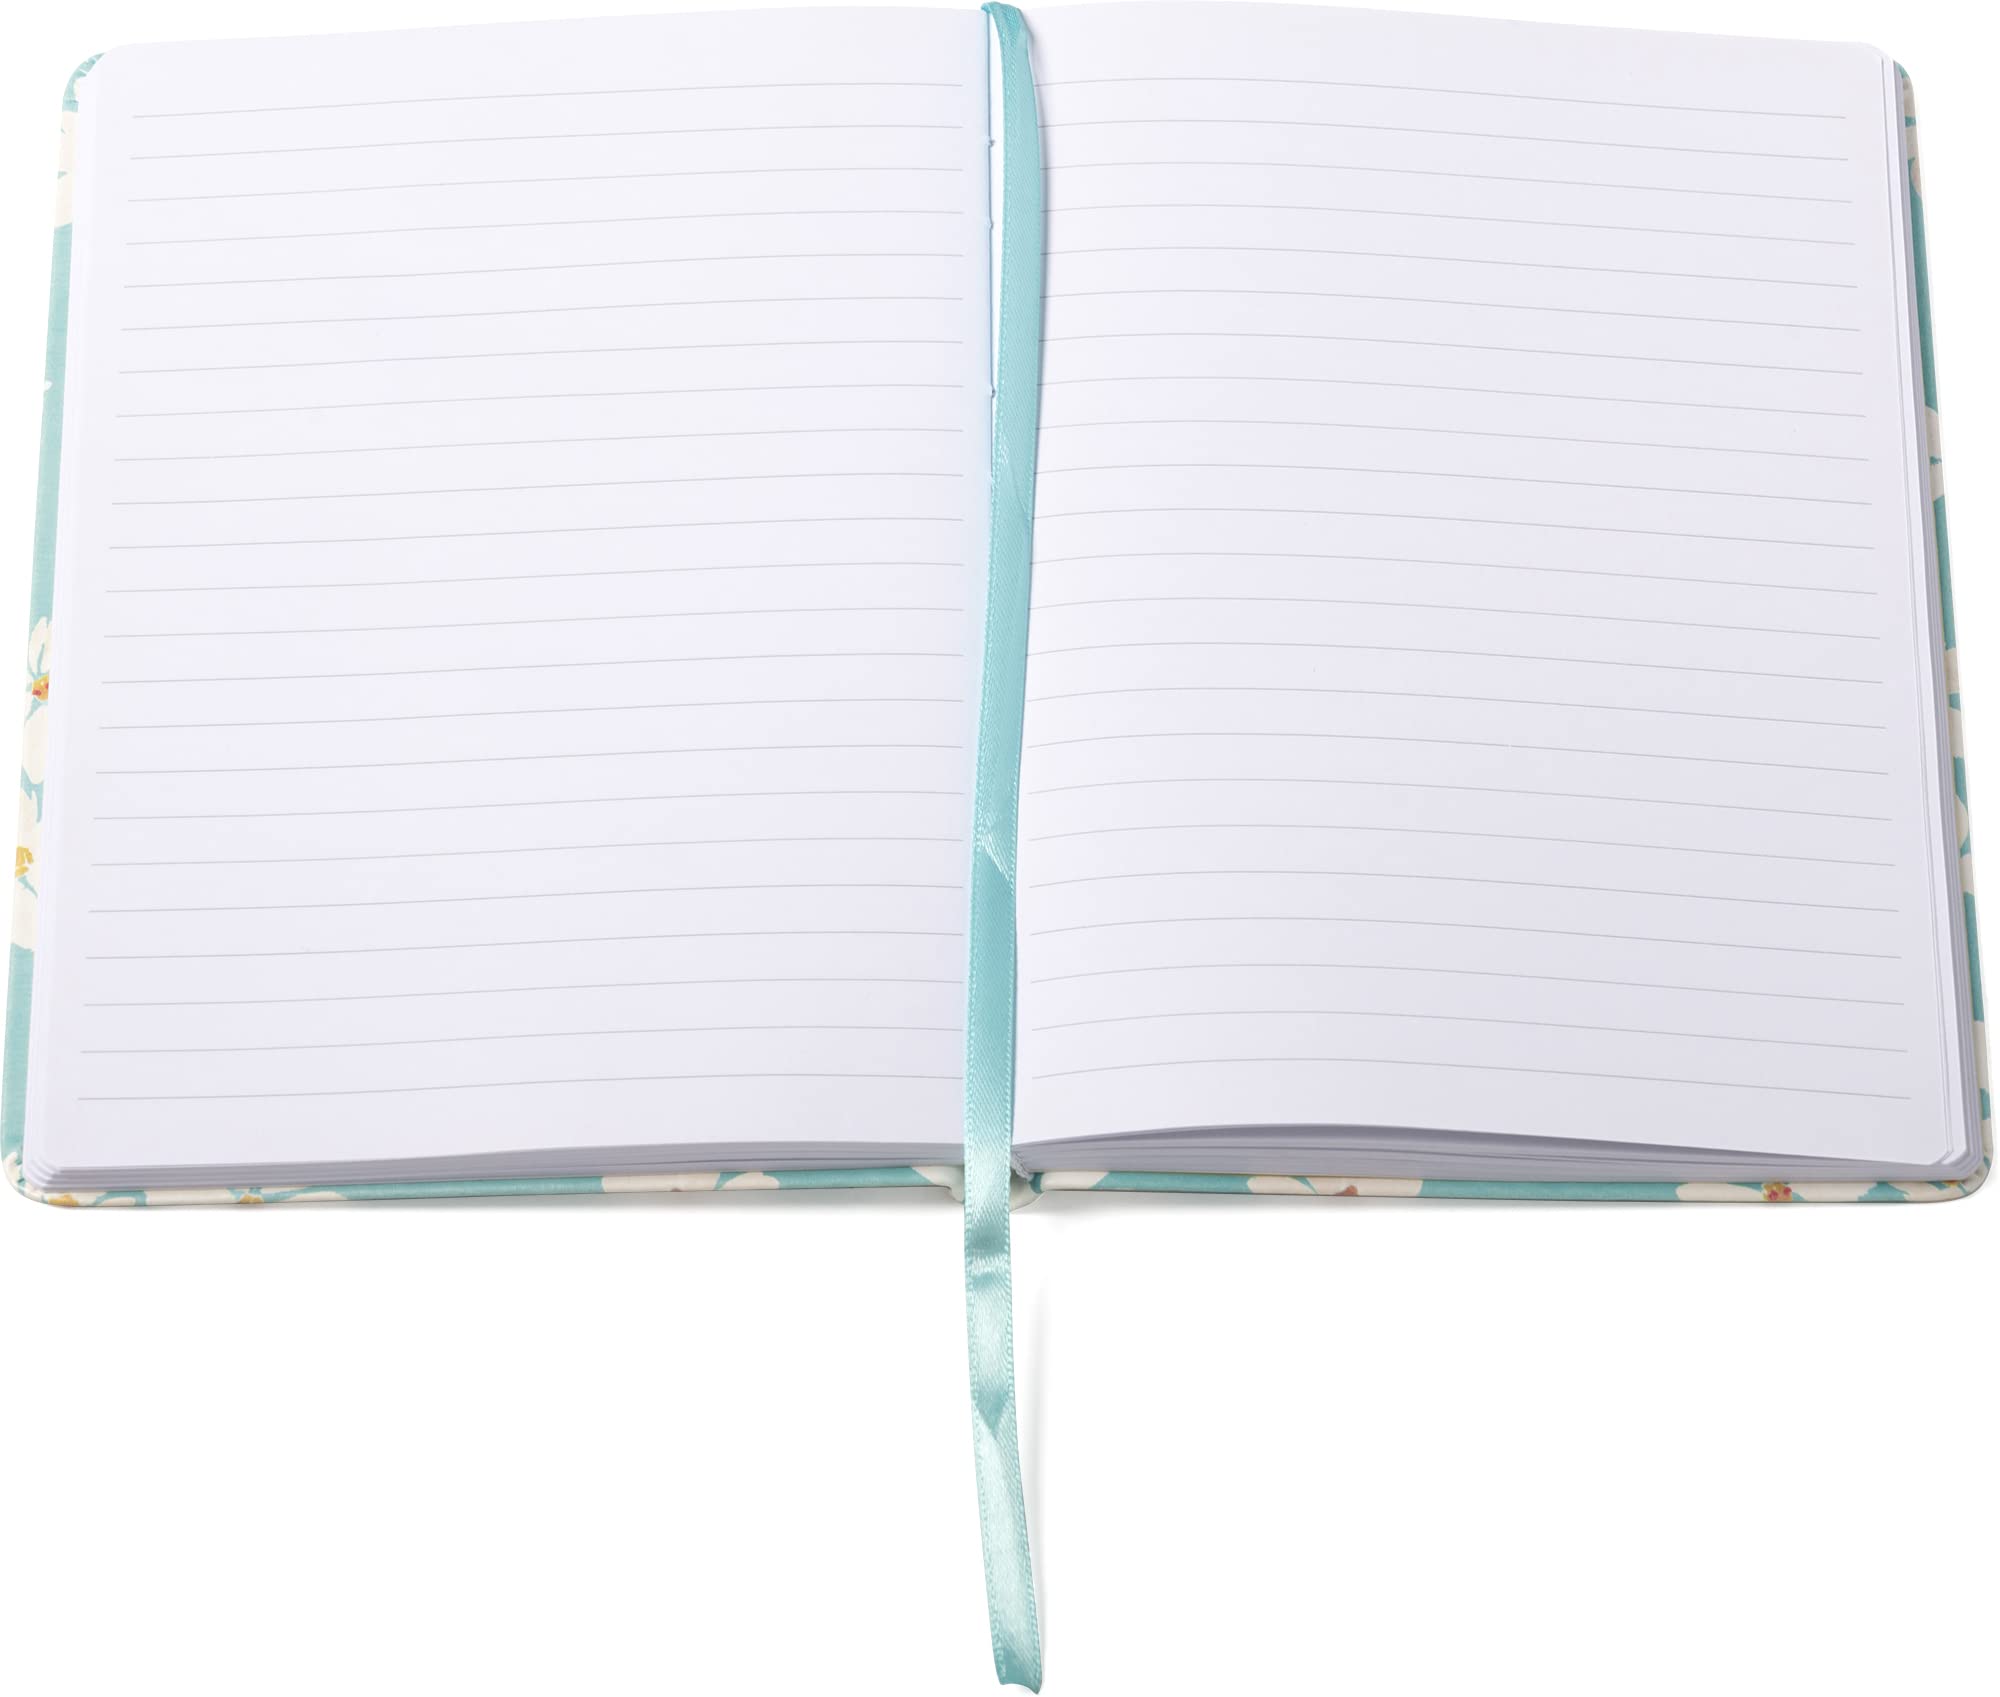 256 Pages Ruled Notebook